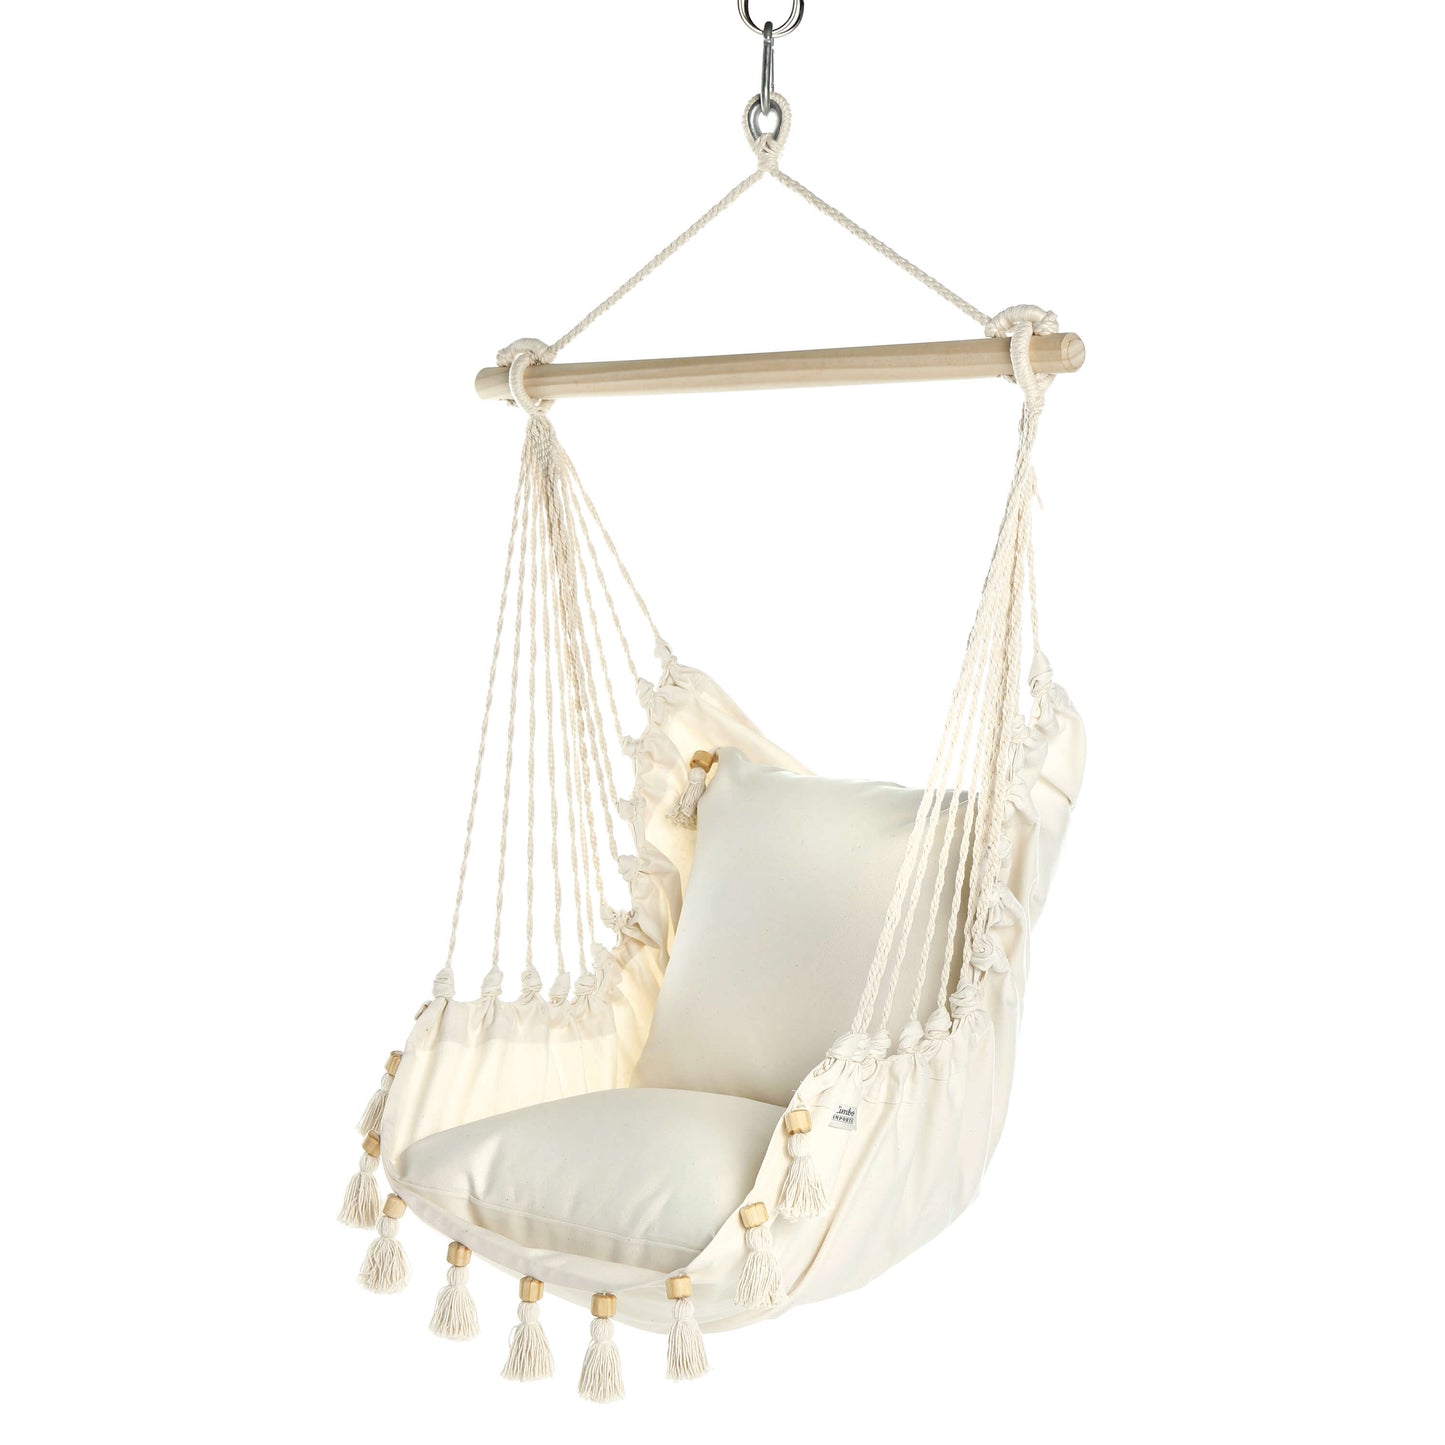 Hammock Chair With Tassels in a white back ground 